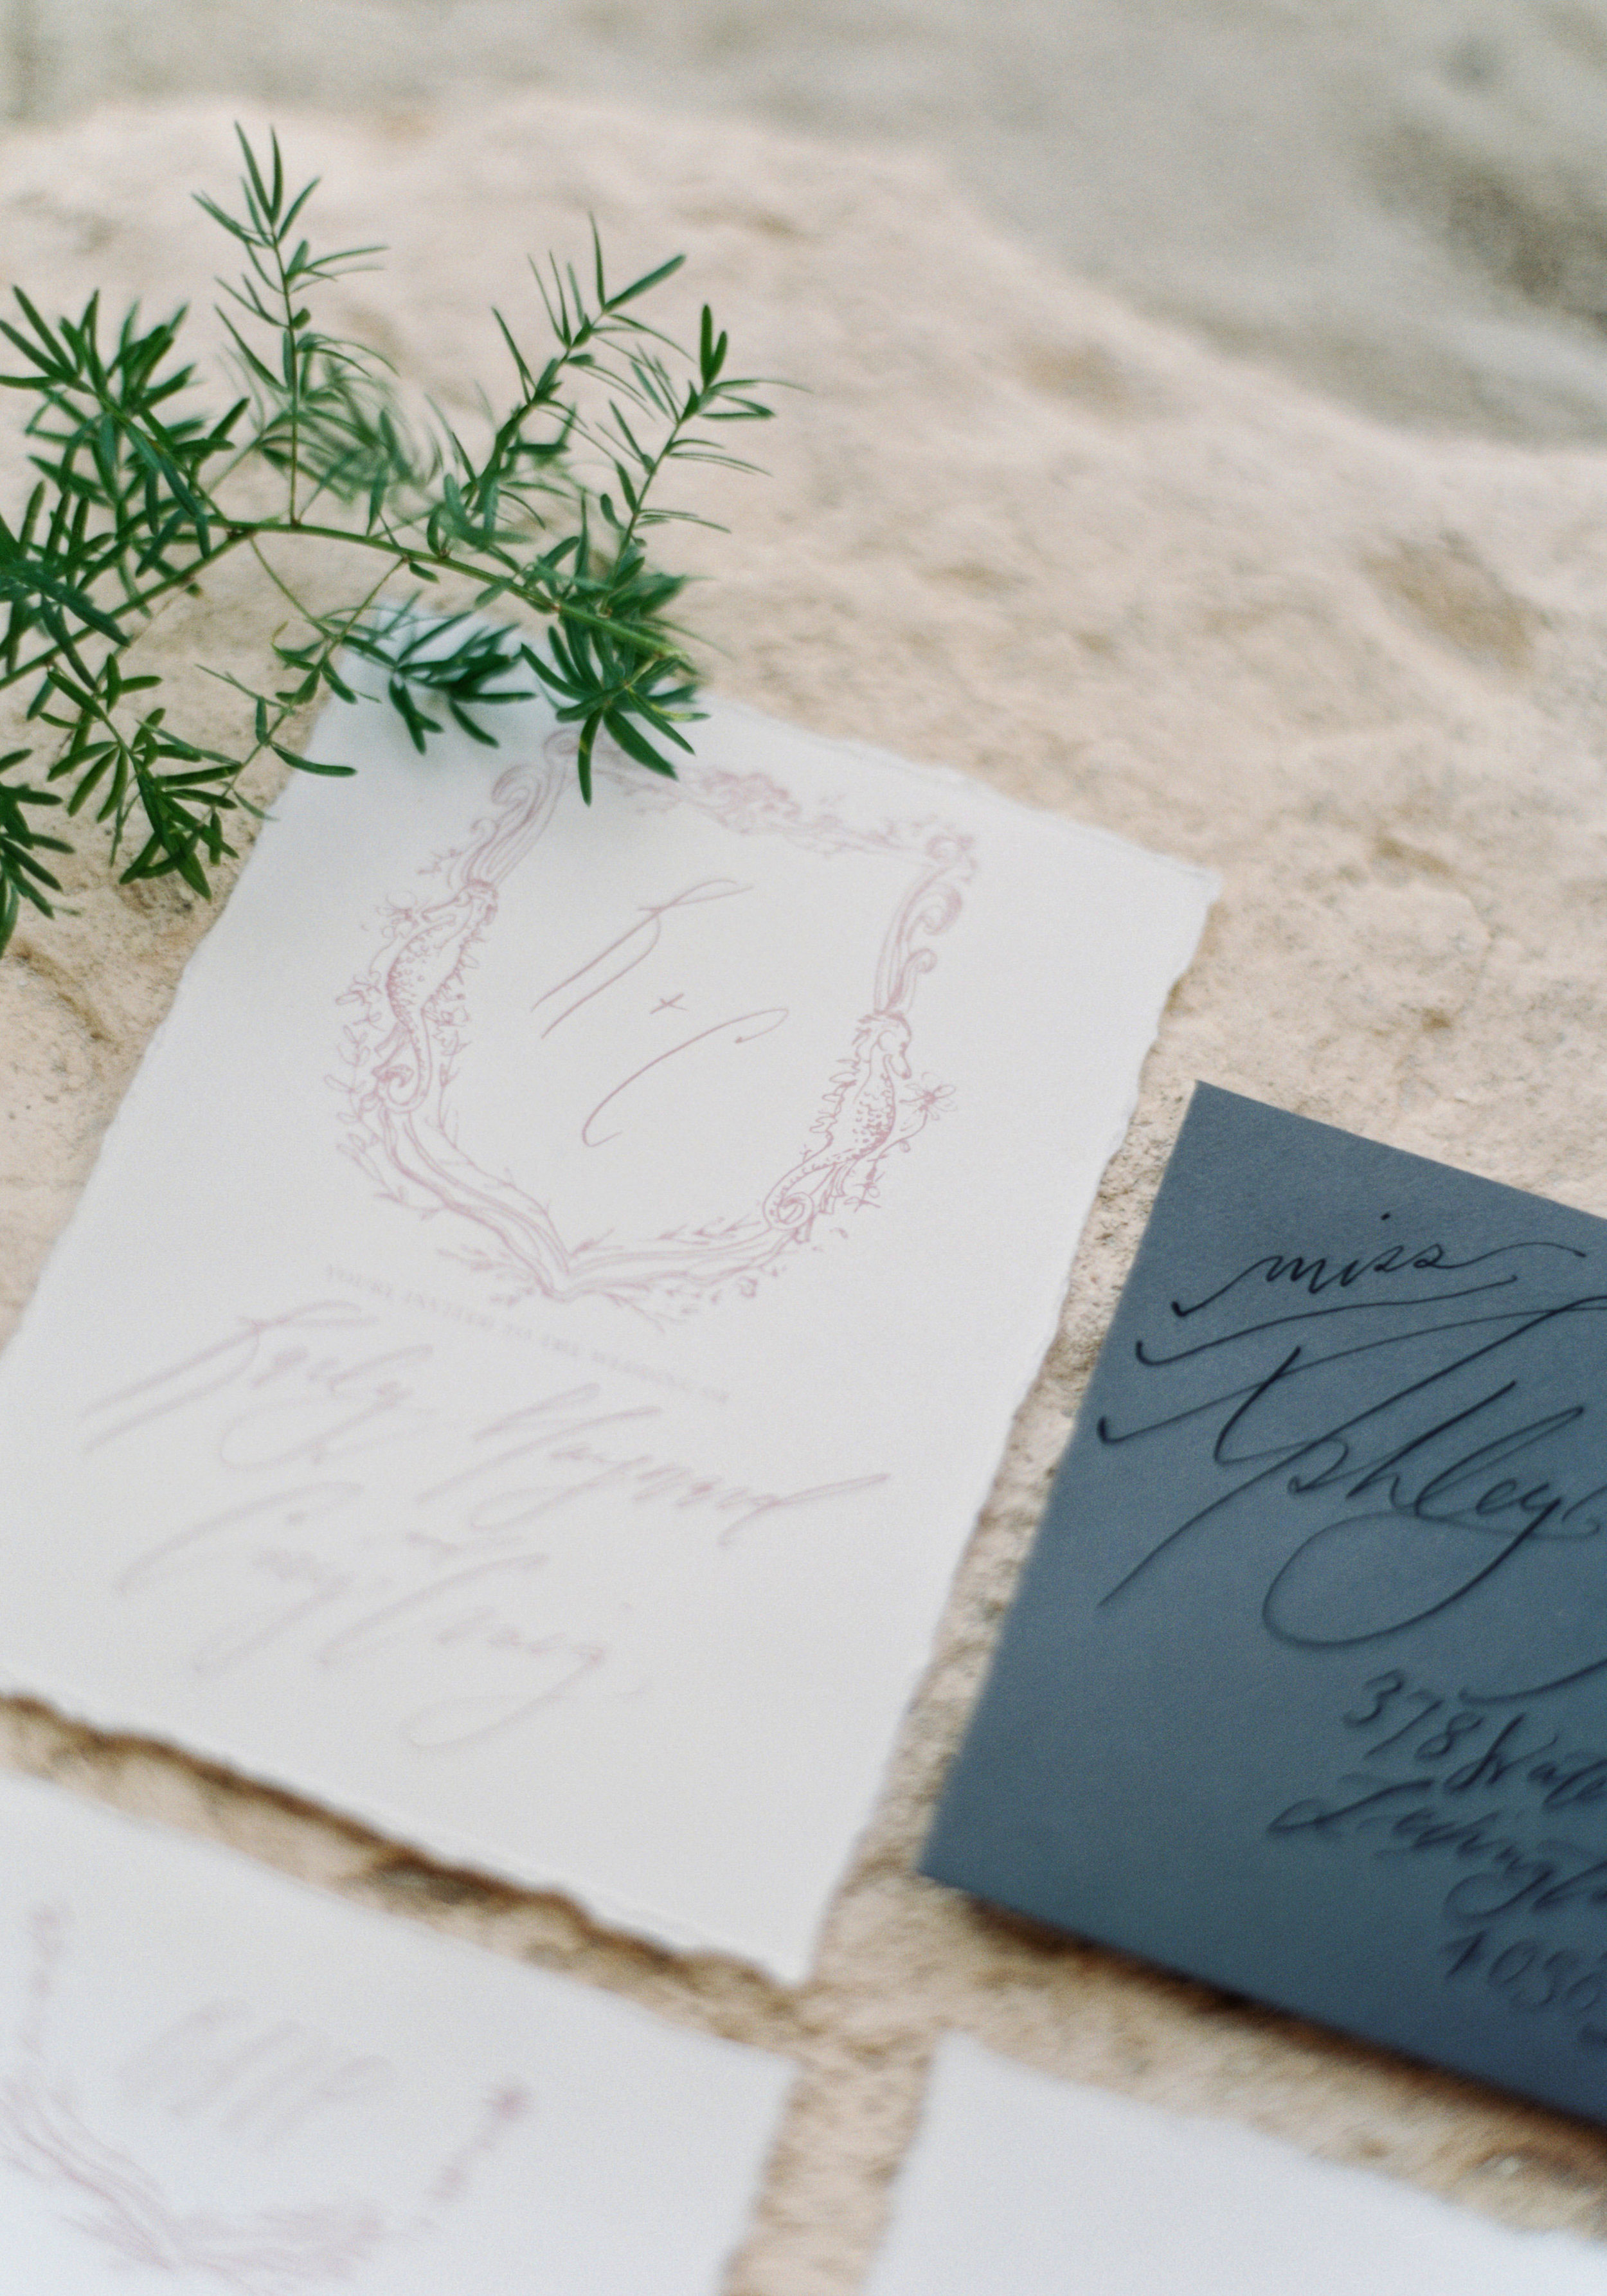 Blush and grey calligraphy invitation suite for a Mexico destination wedding on the beach. www.me-and-mrjones.com